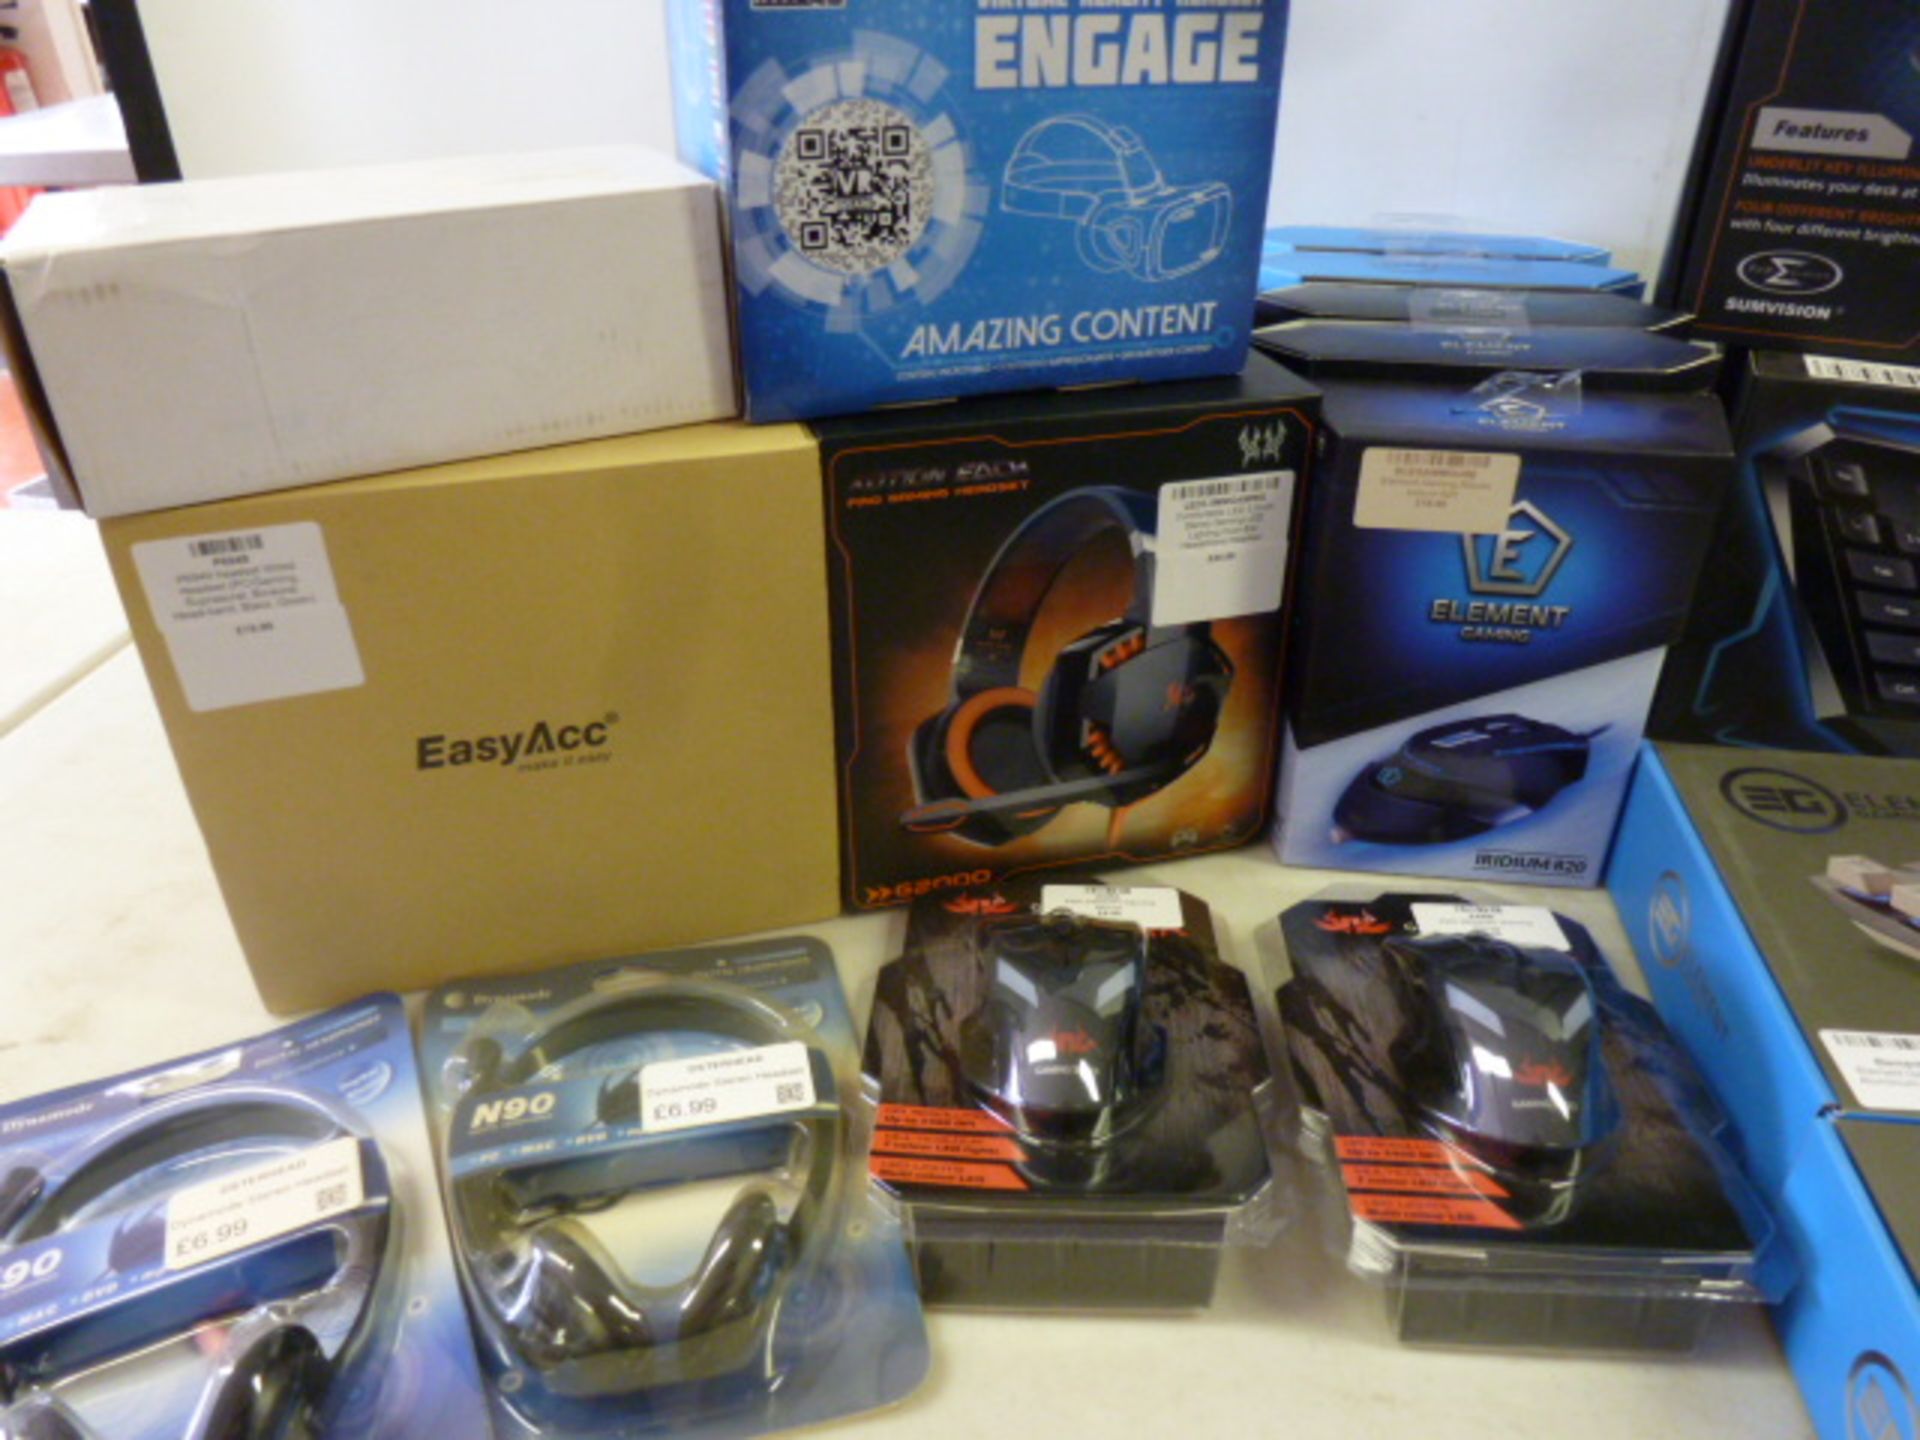 Lot Consisting of 25 Assorted Gaming Accessories to Include: 5 x Element Gaming Mouse, 4 x Element - Image 2 of 10